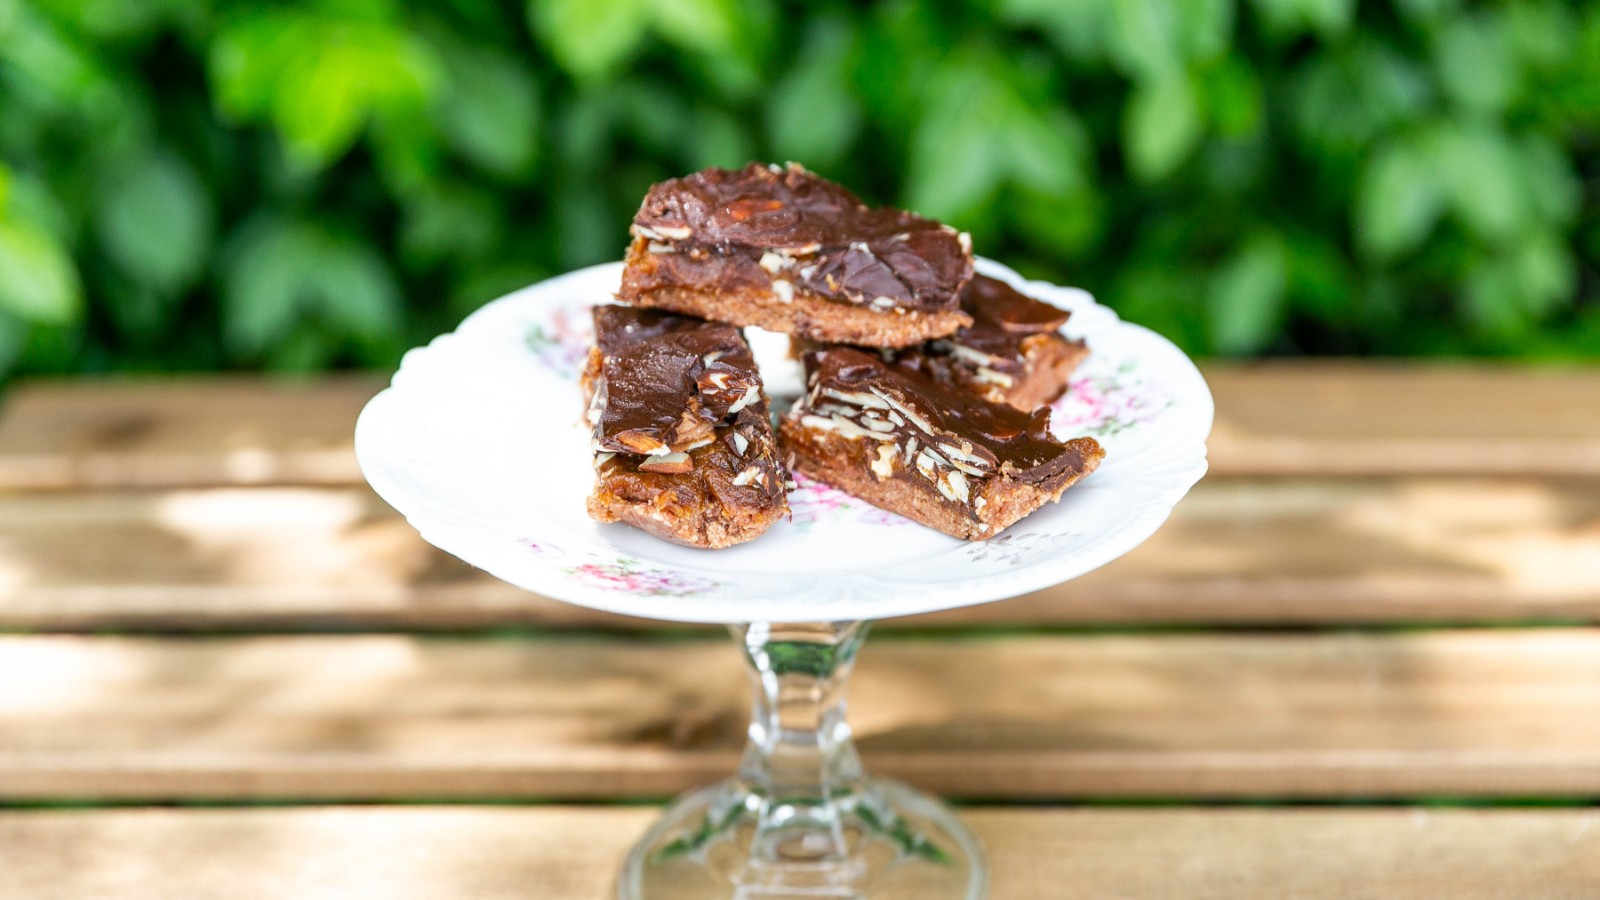 Image of Homemade Snickers Bars with Almonds